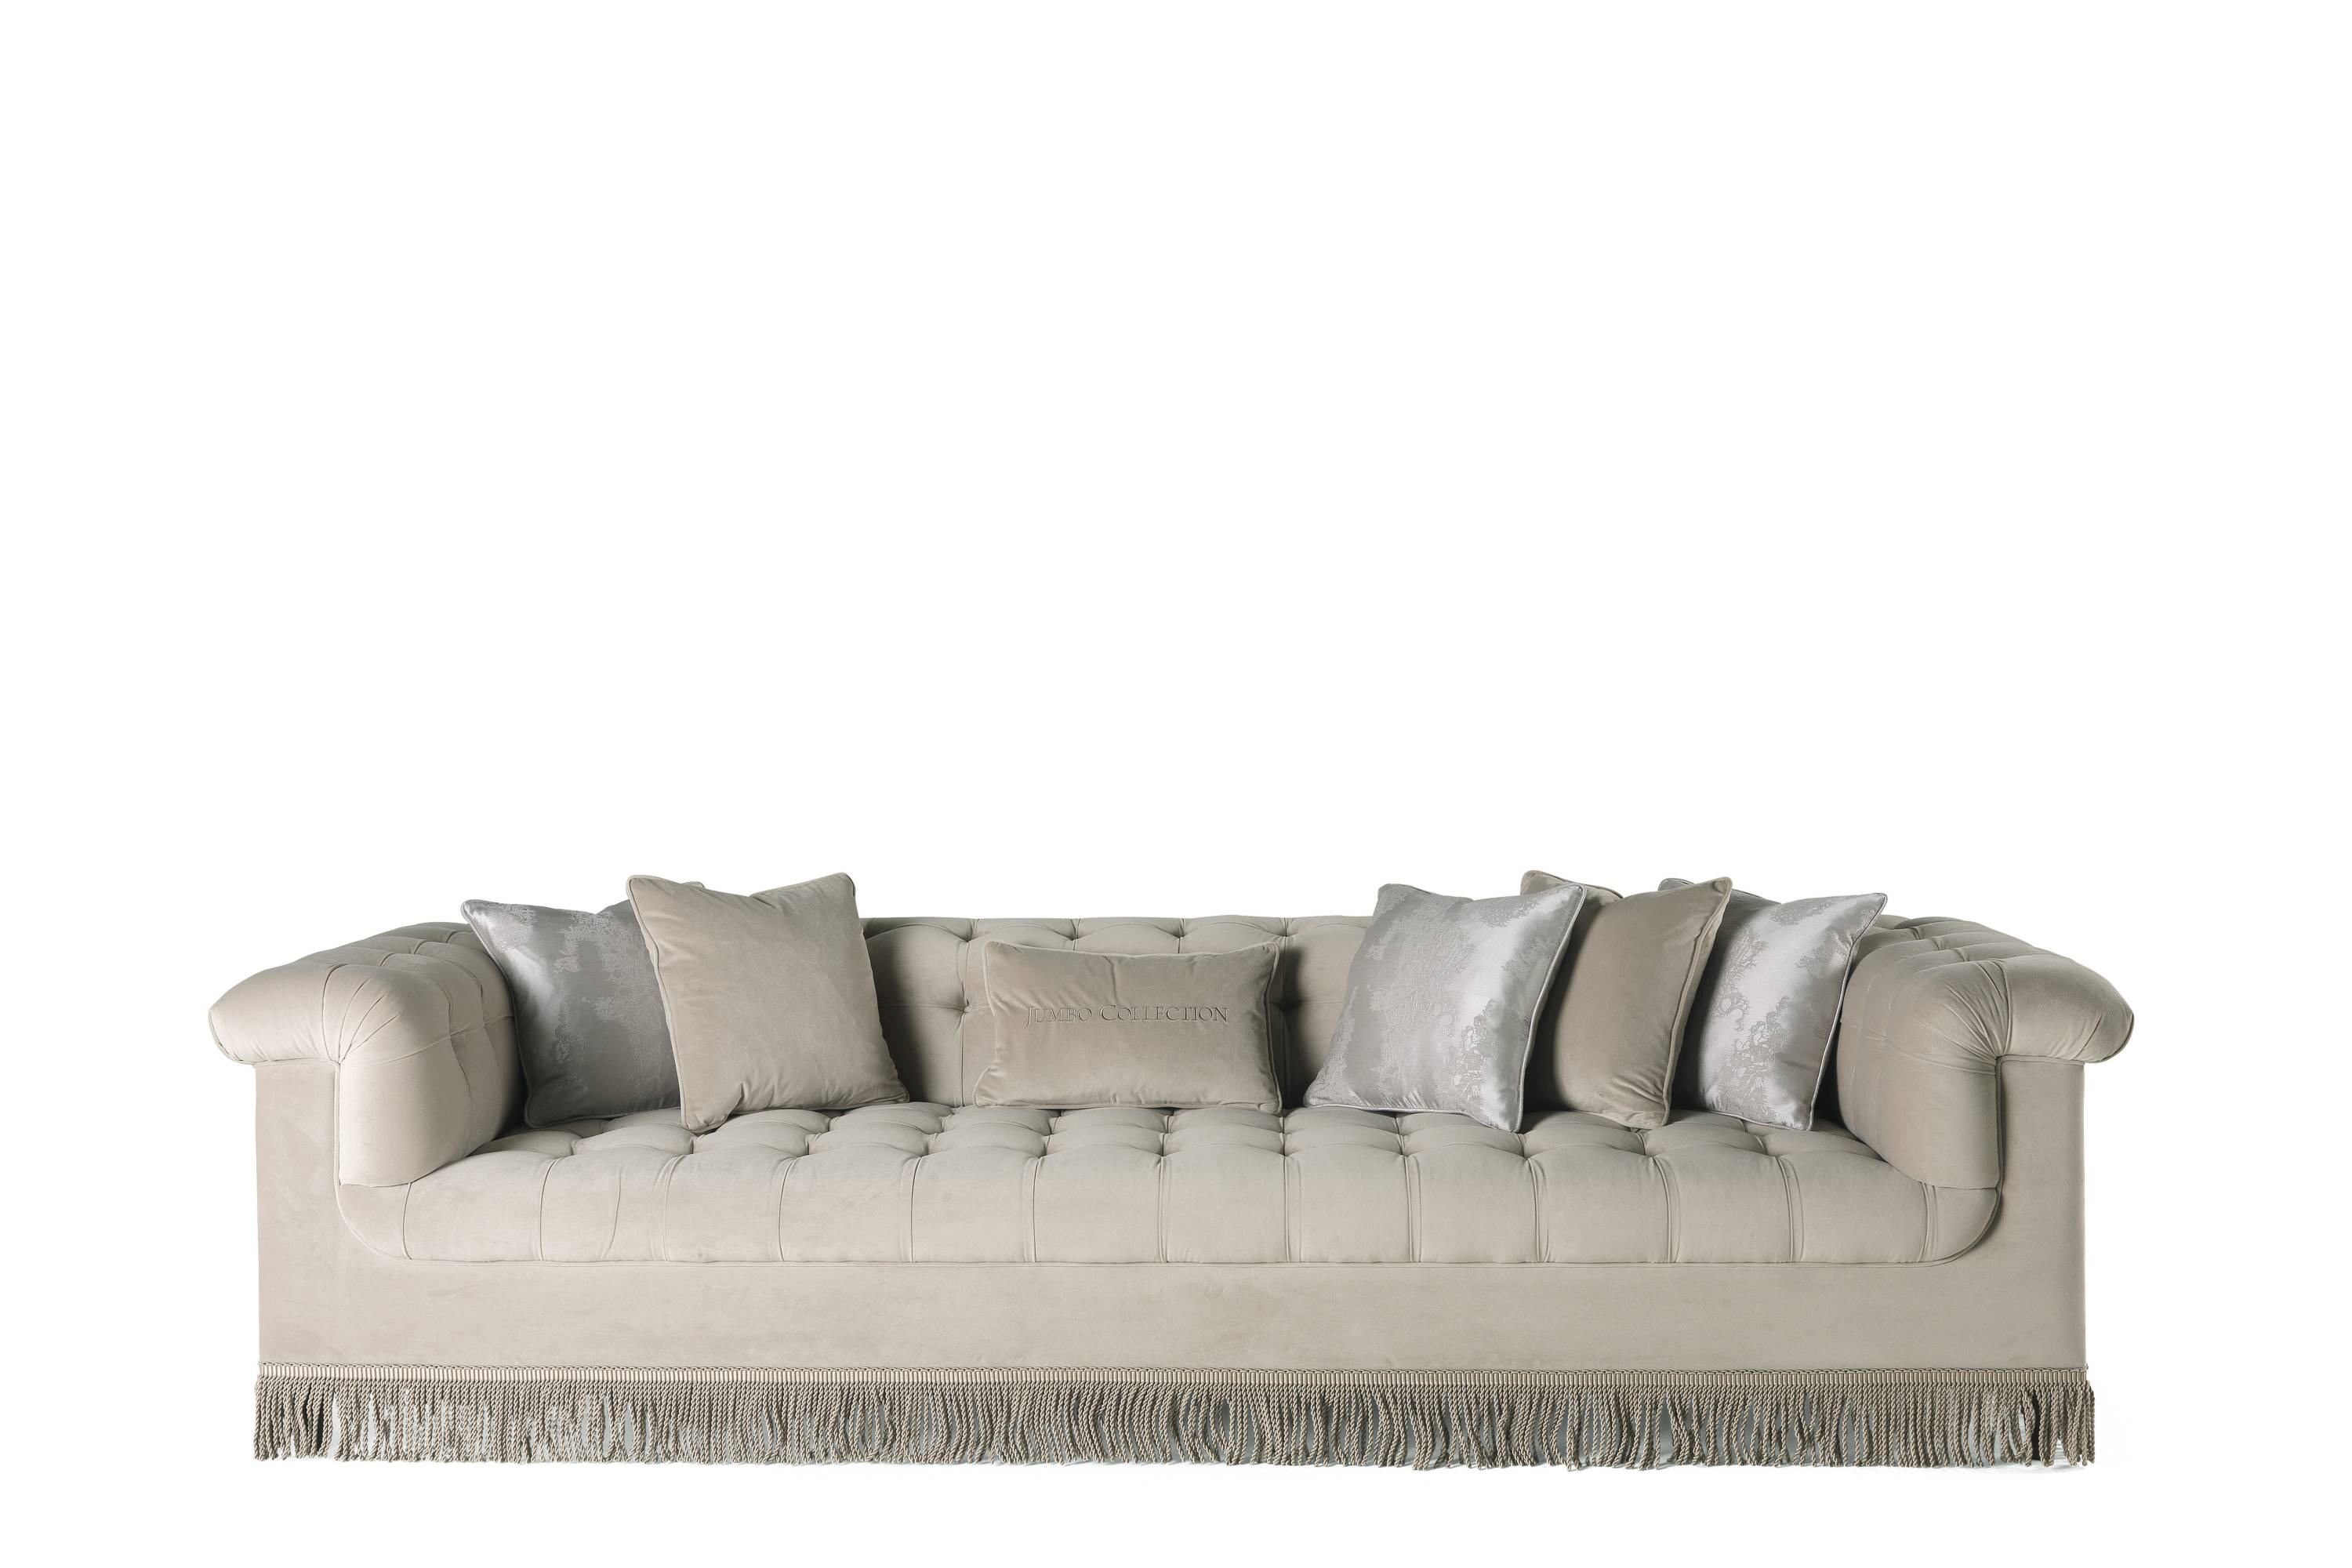 GRAND ARMÉE 2-seater sofa - 3-seater sofa - armchair - sofa - A luxury experience with the Héritage collection and its classic luxurious furniture